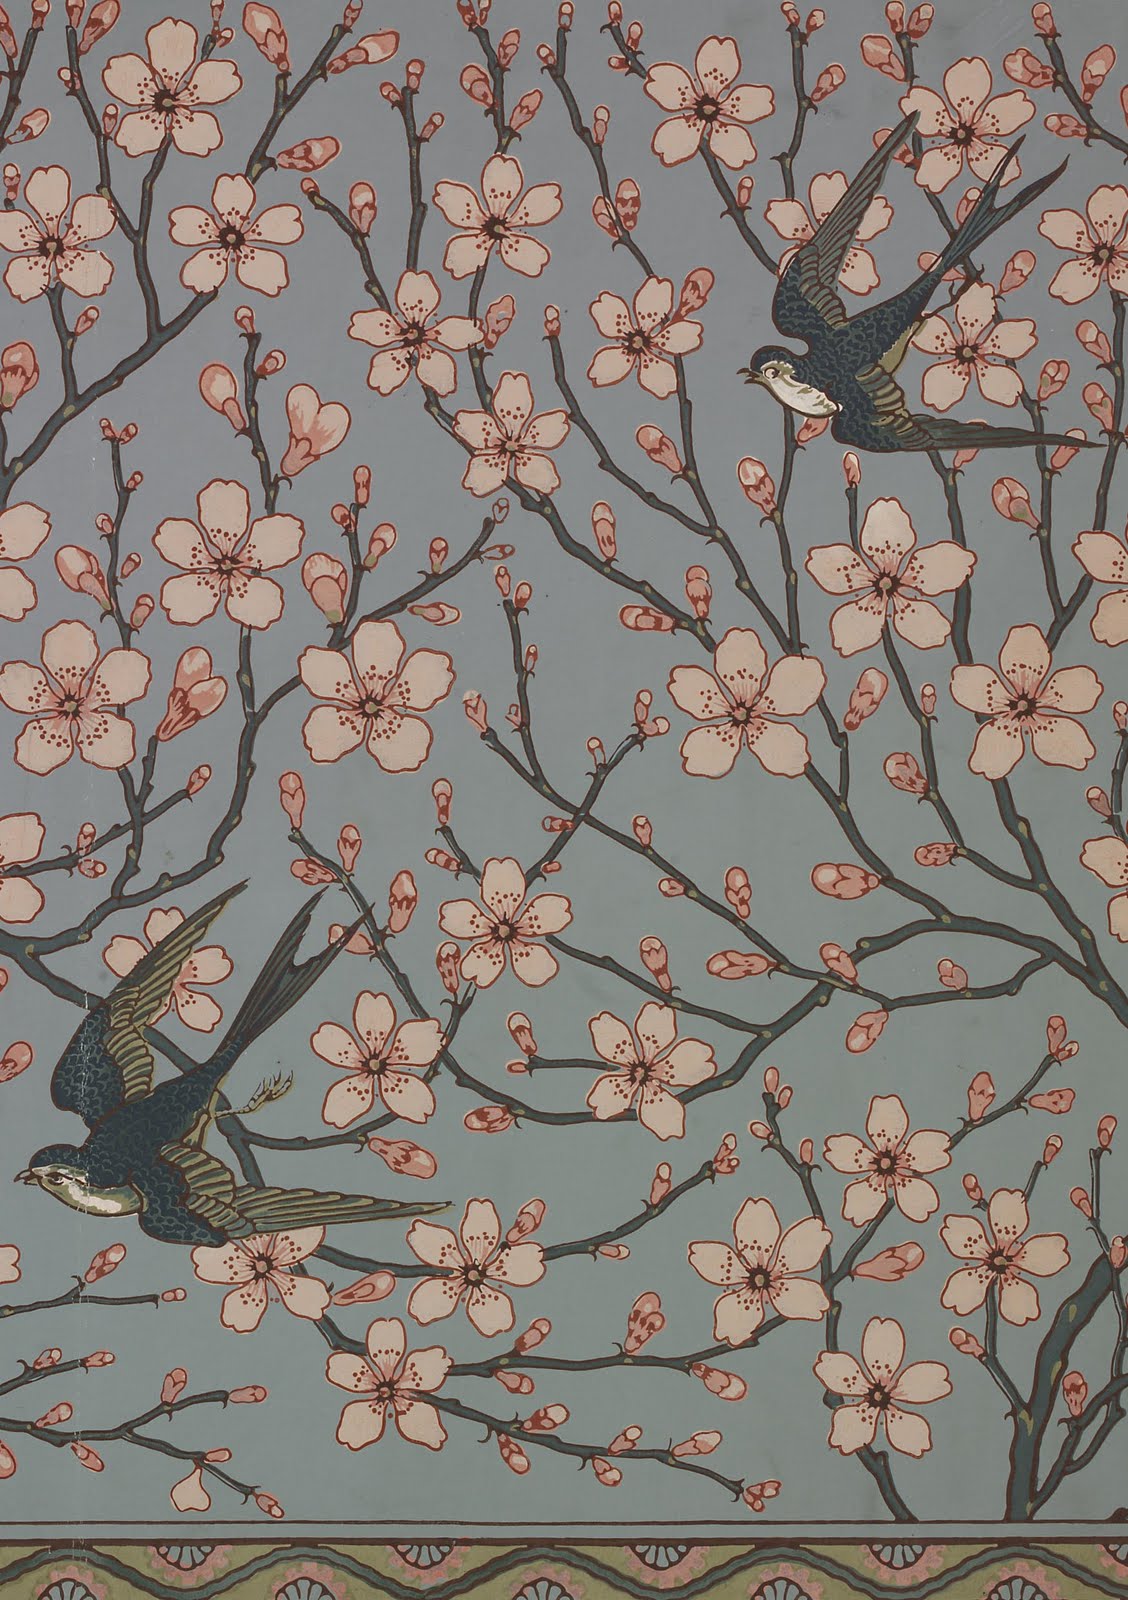 Almond Blossom and Swallow wallpaper frieze designed by Walter Crane ...